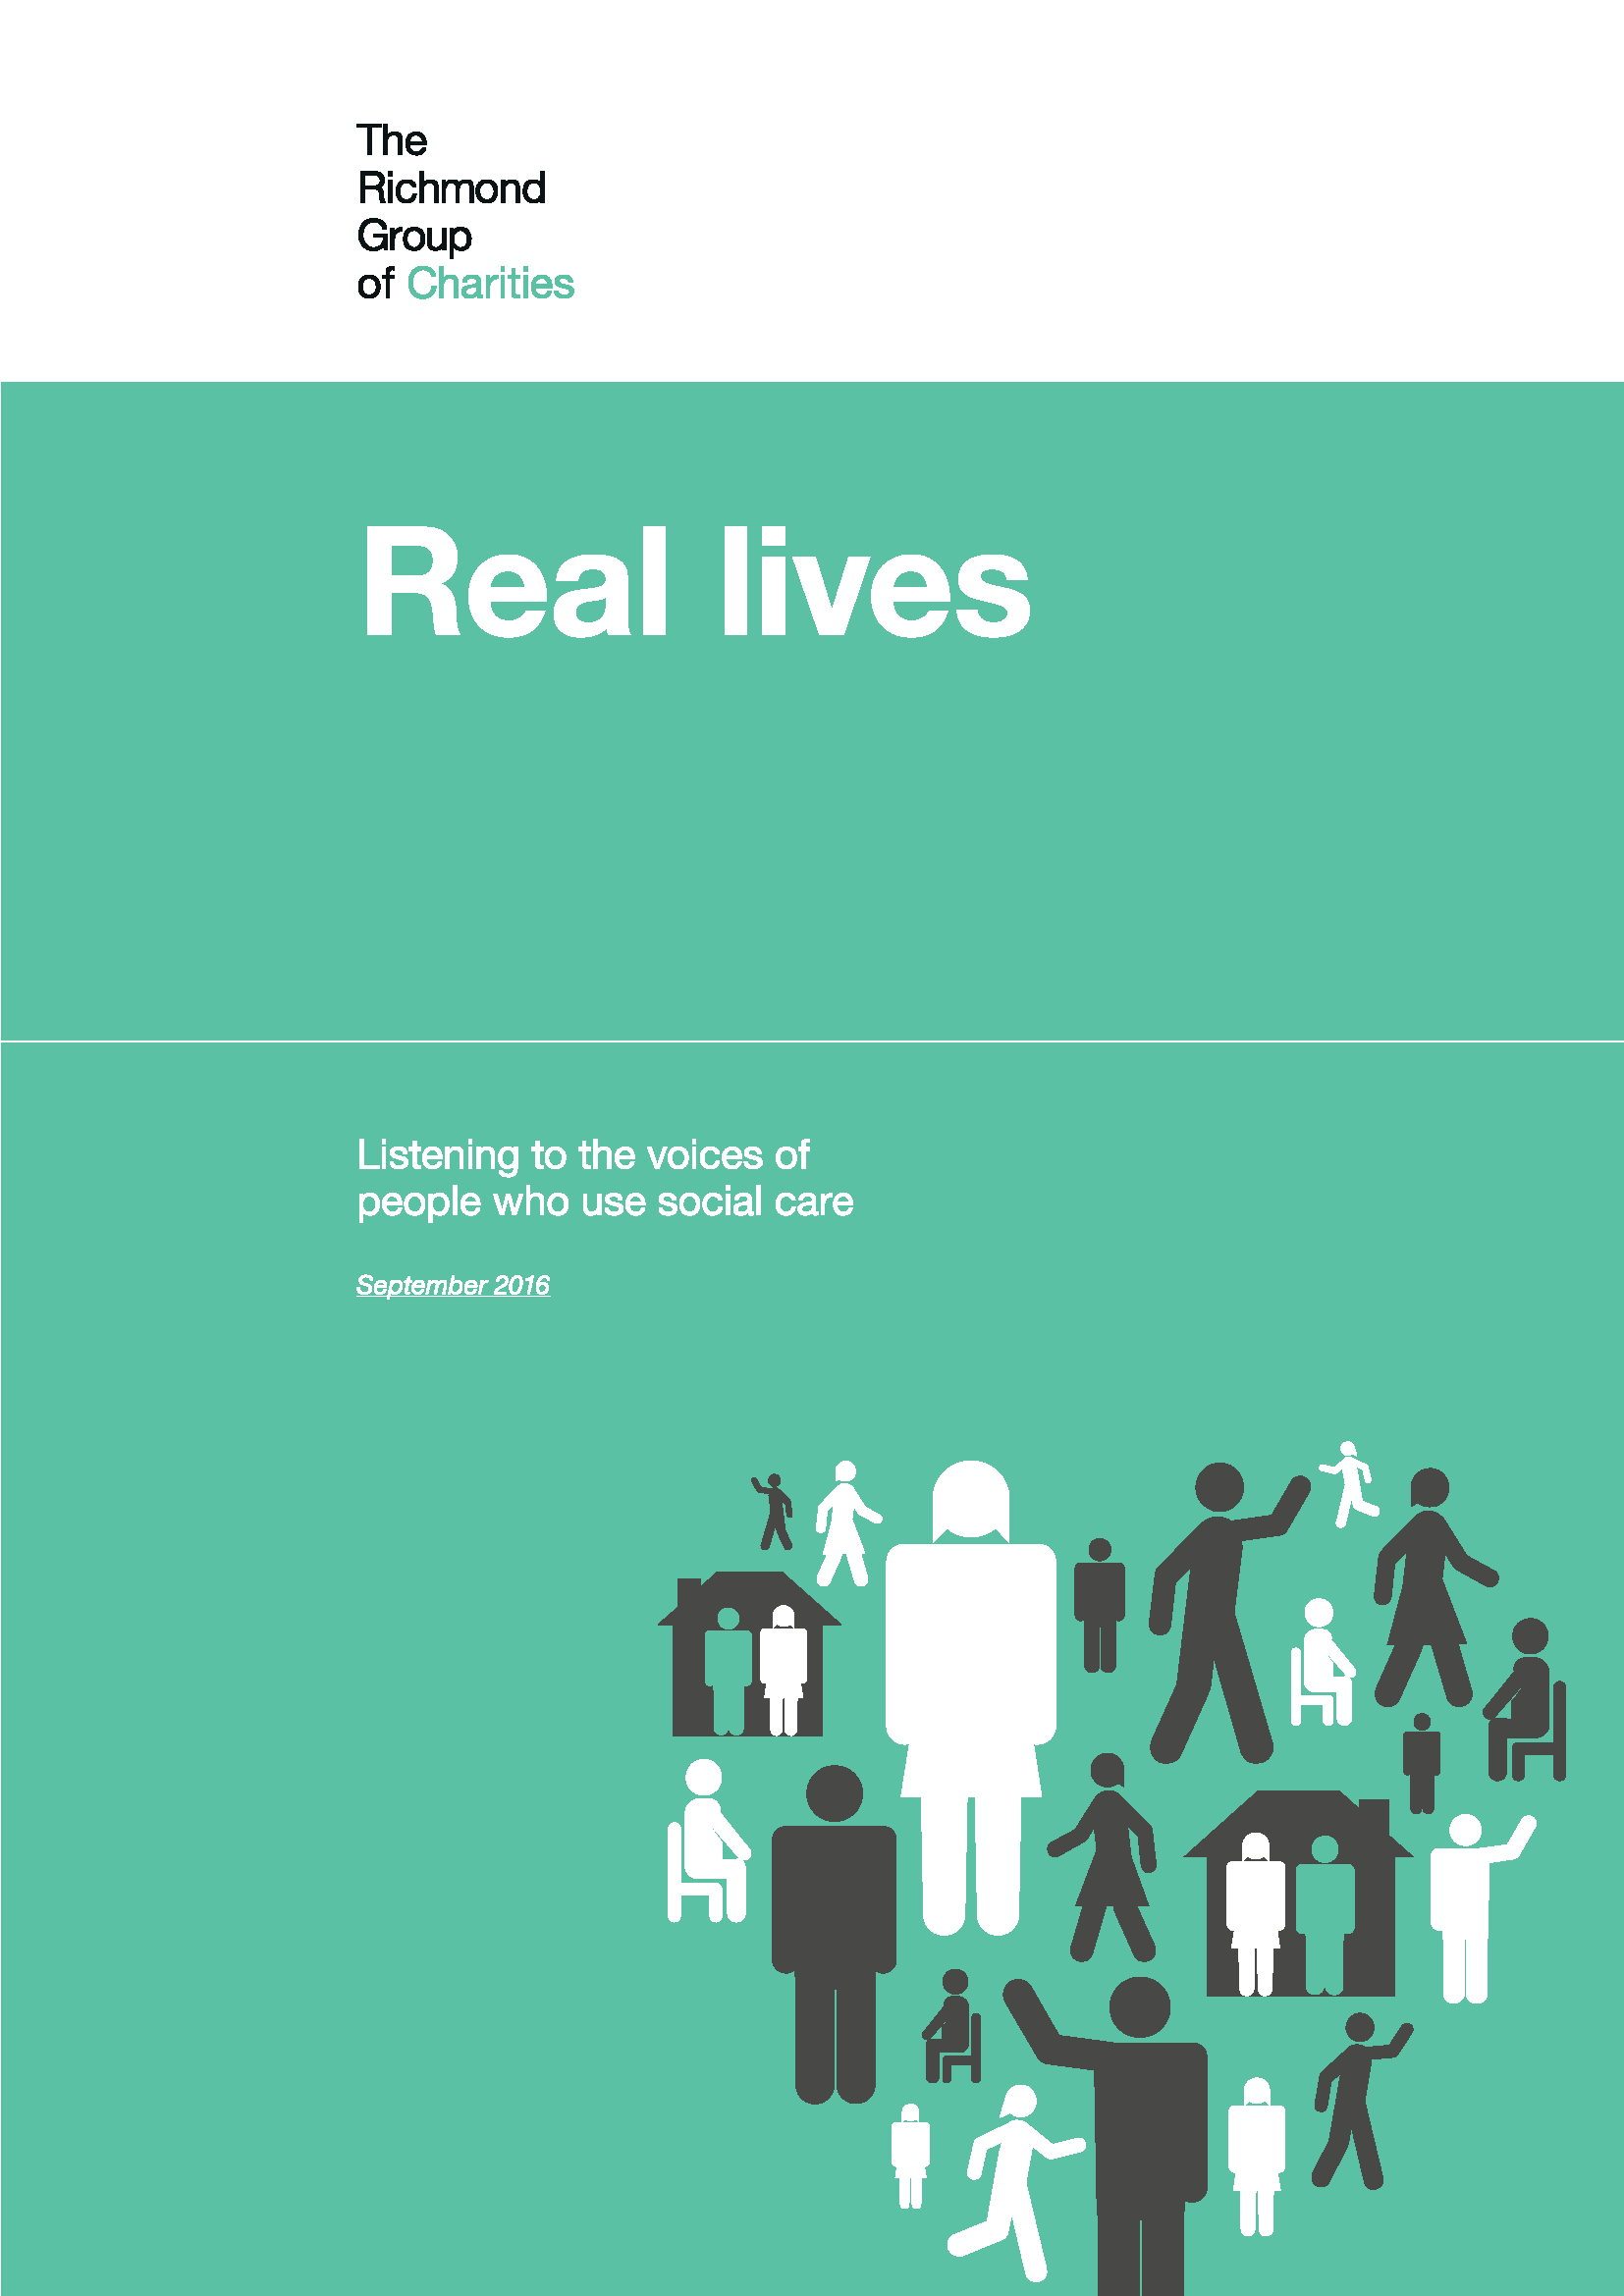 Real lives: Listening to the voices of people who use social care